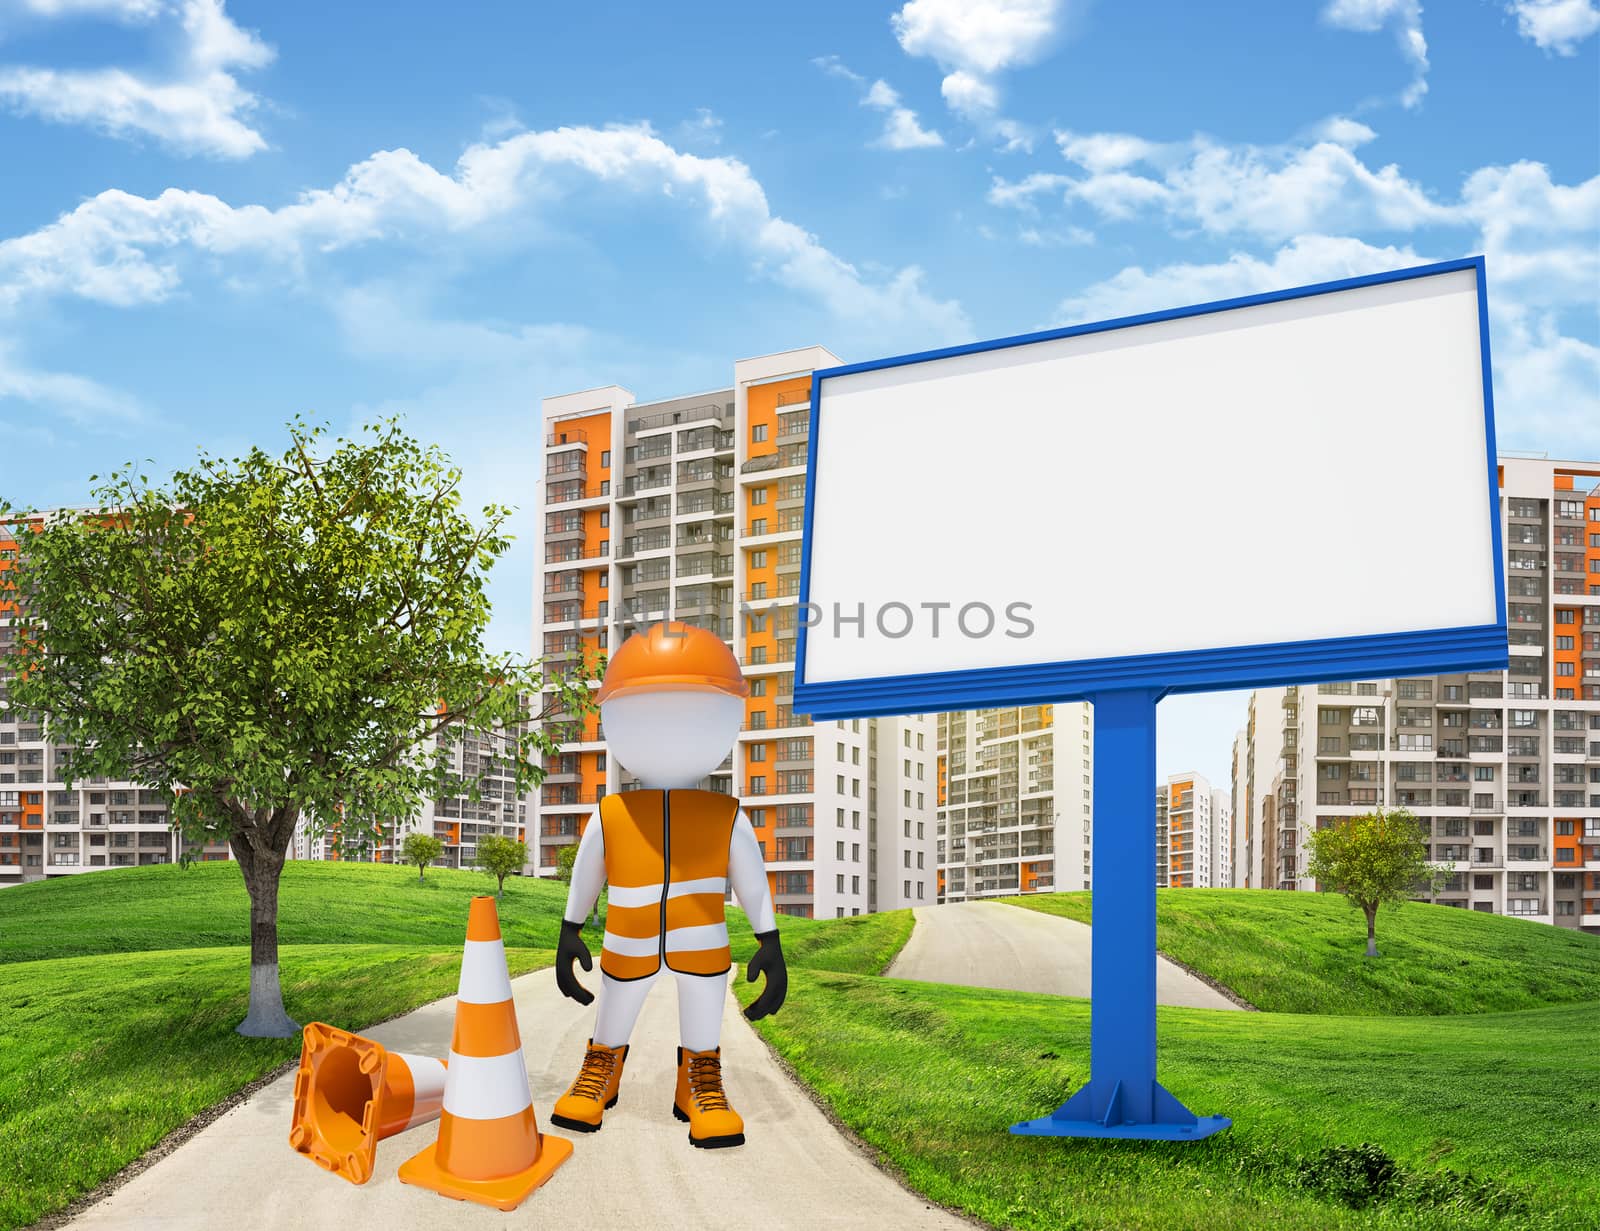 Three-dimensional man dressed as a road worker standing on road running through green hills. Green tree and billbord beside. Tall buildings in background